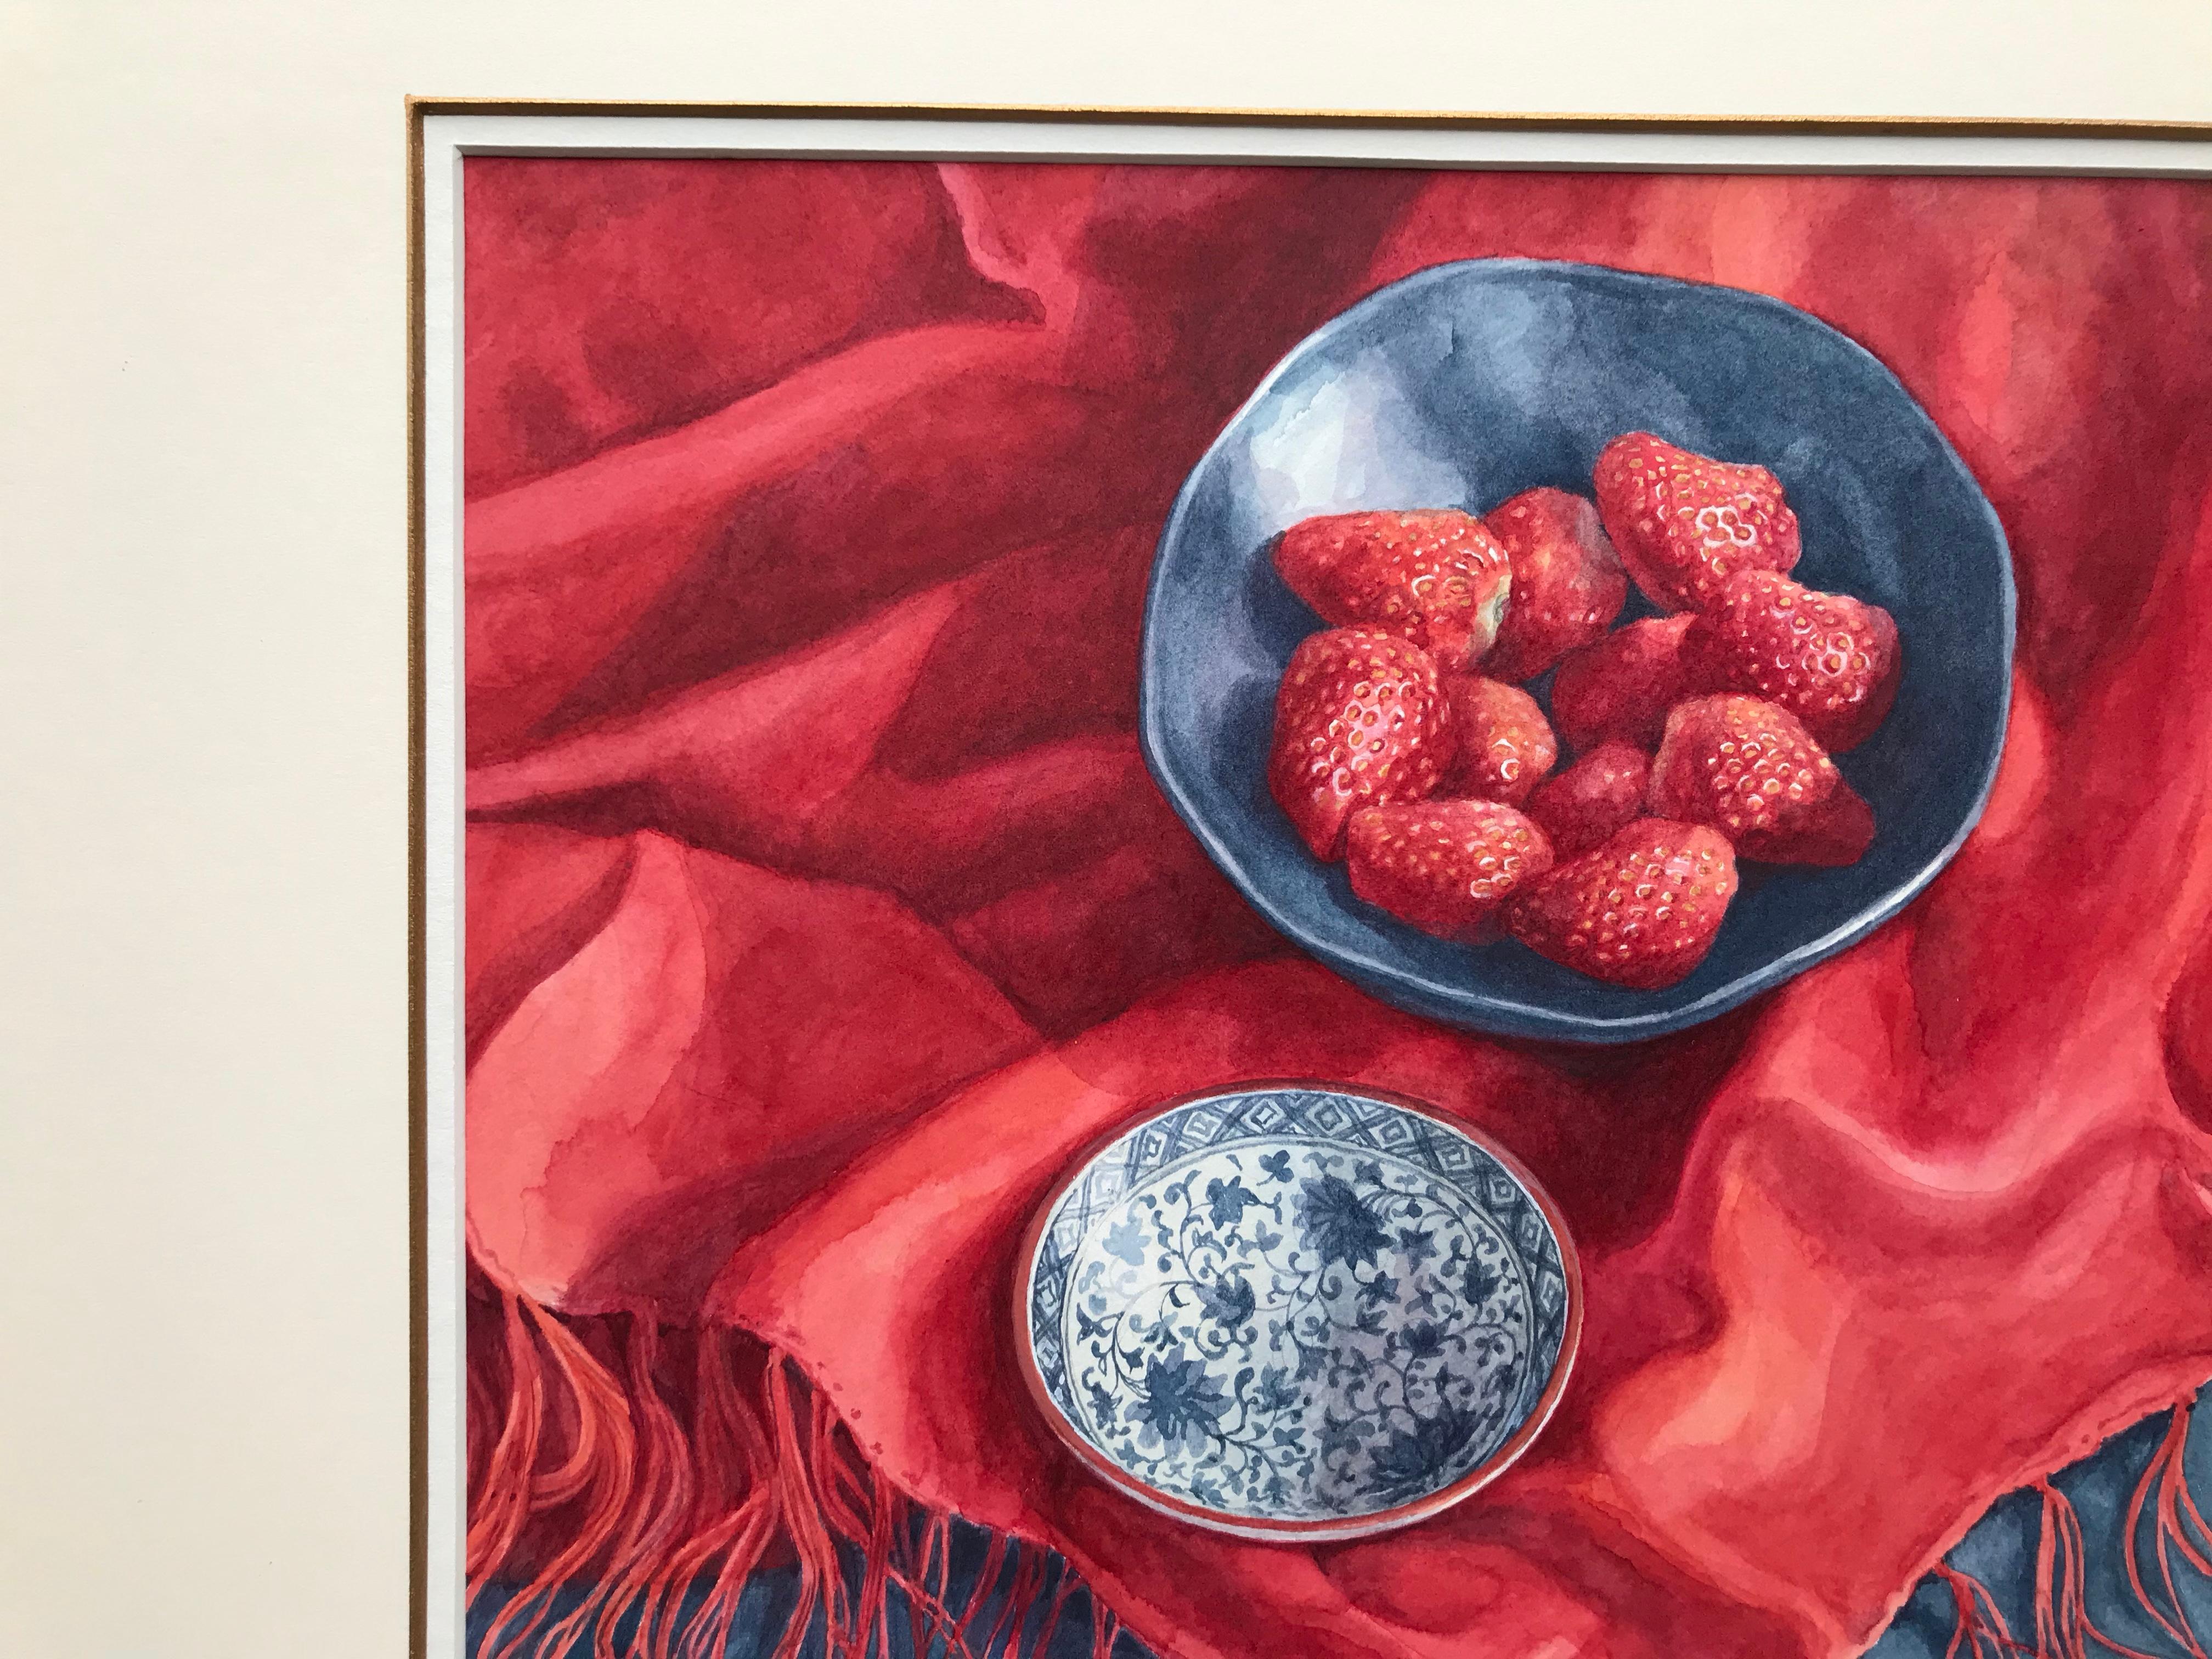 Janet Skea (born 1947)
Still life of strawberries
Signed
Watercolour
10.75 x 12 inches
19 x 20 inches with frame

An incredibly highly detailed still life of a bowl of sumptuous strawberries on a silk scarf. Almost good enough to eat!

Janet Skea is